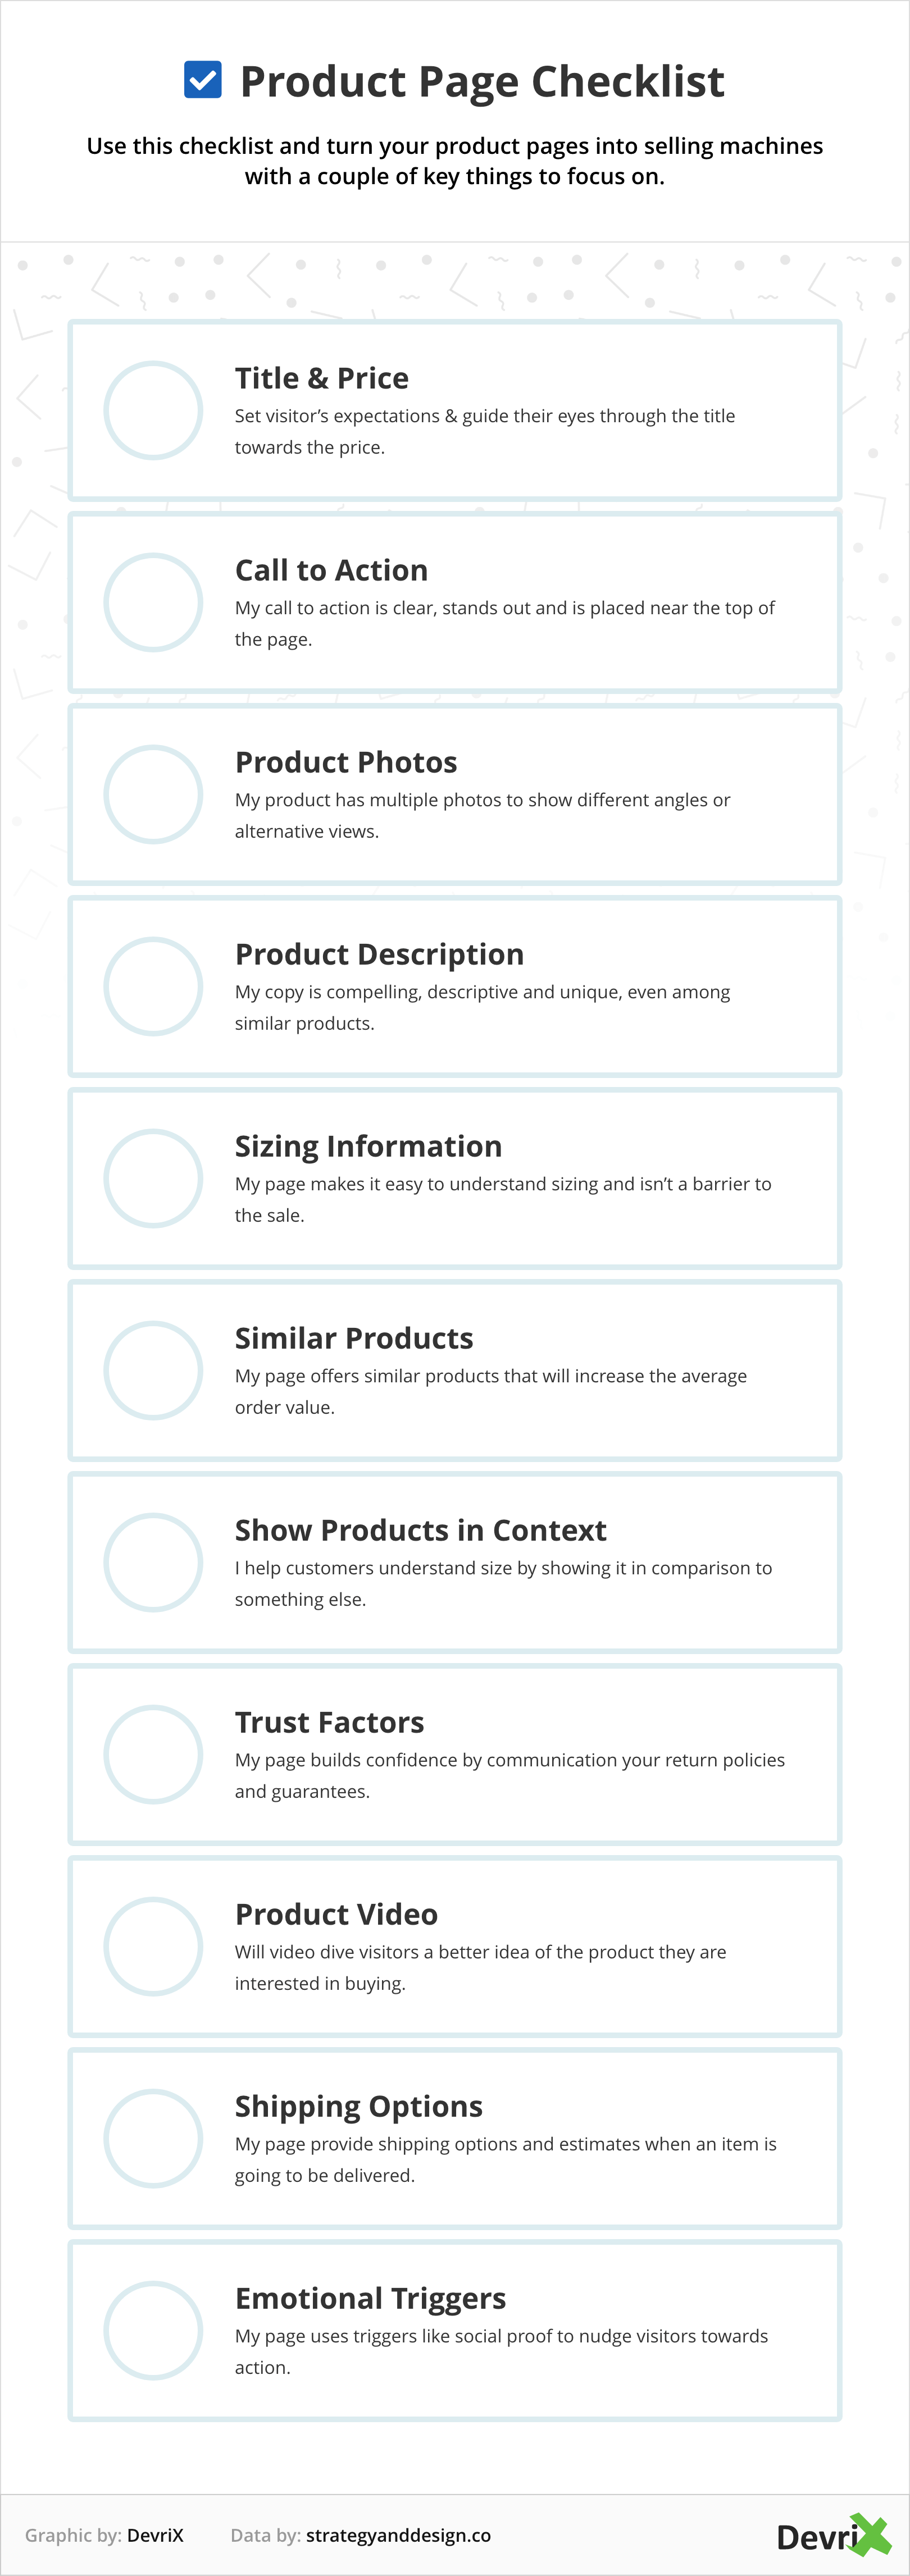 Product Page Checklist